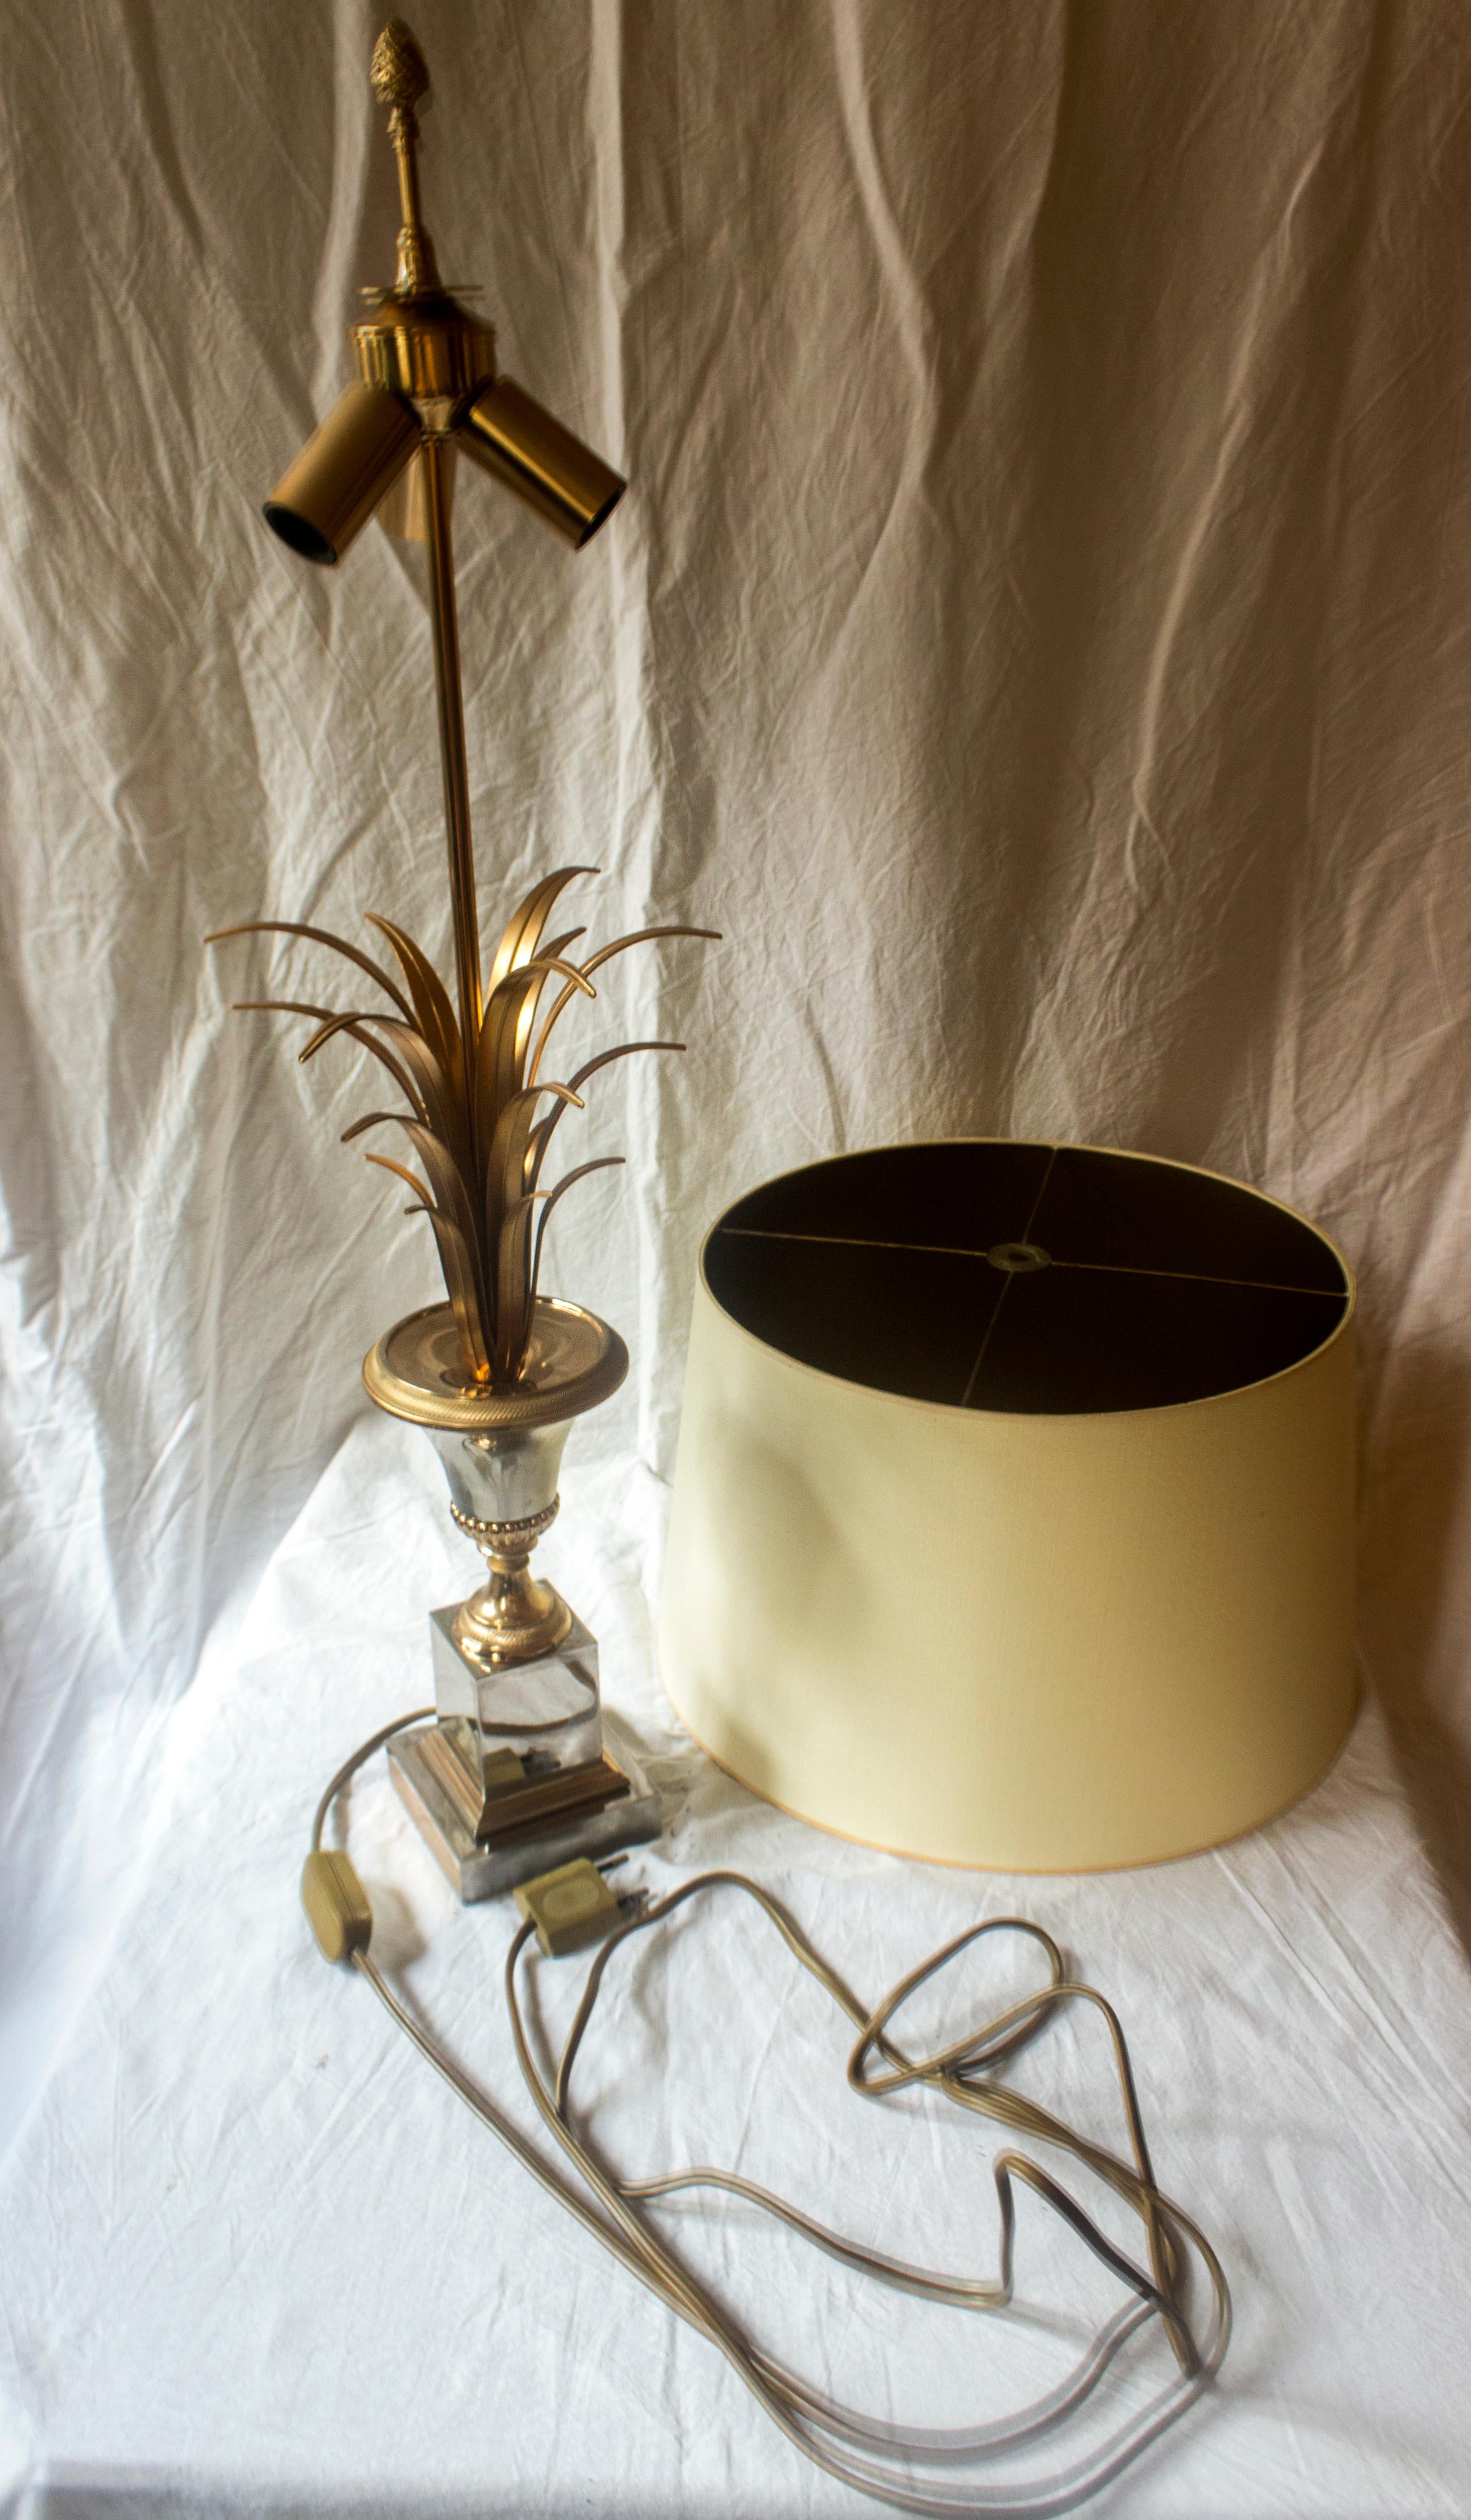 This magnificent Hollywood Regency style Boulanger table lamp, reminiscent of Maison Charles, is crafted from gilded metal and features an original lampshade adorned with pineapple leaves. This authentic vintage table lamp is from Belgium and dates